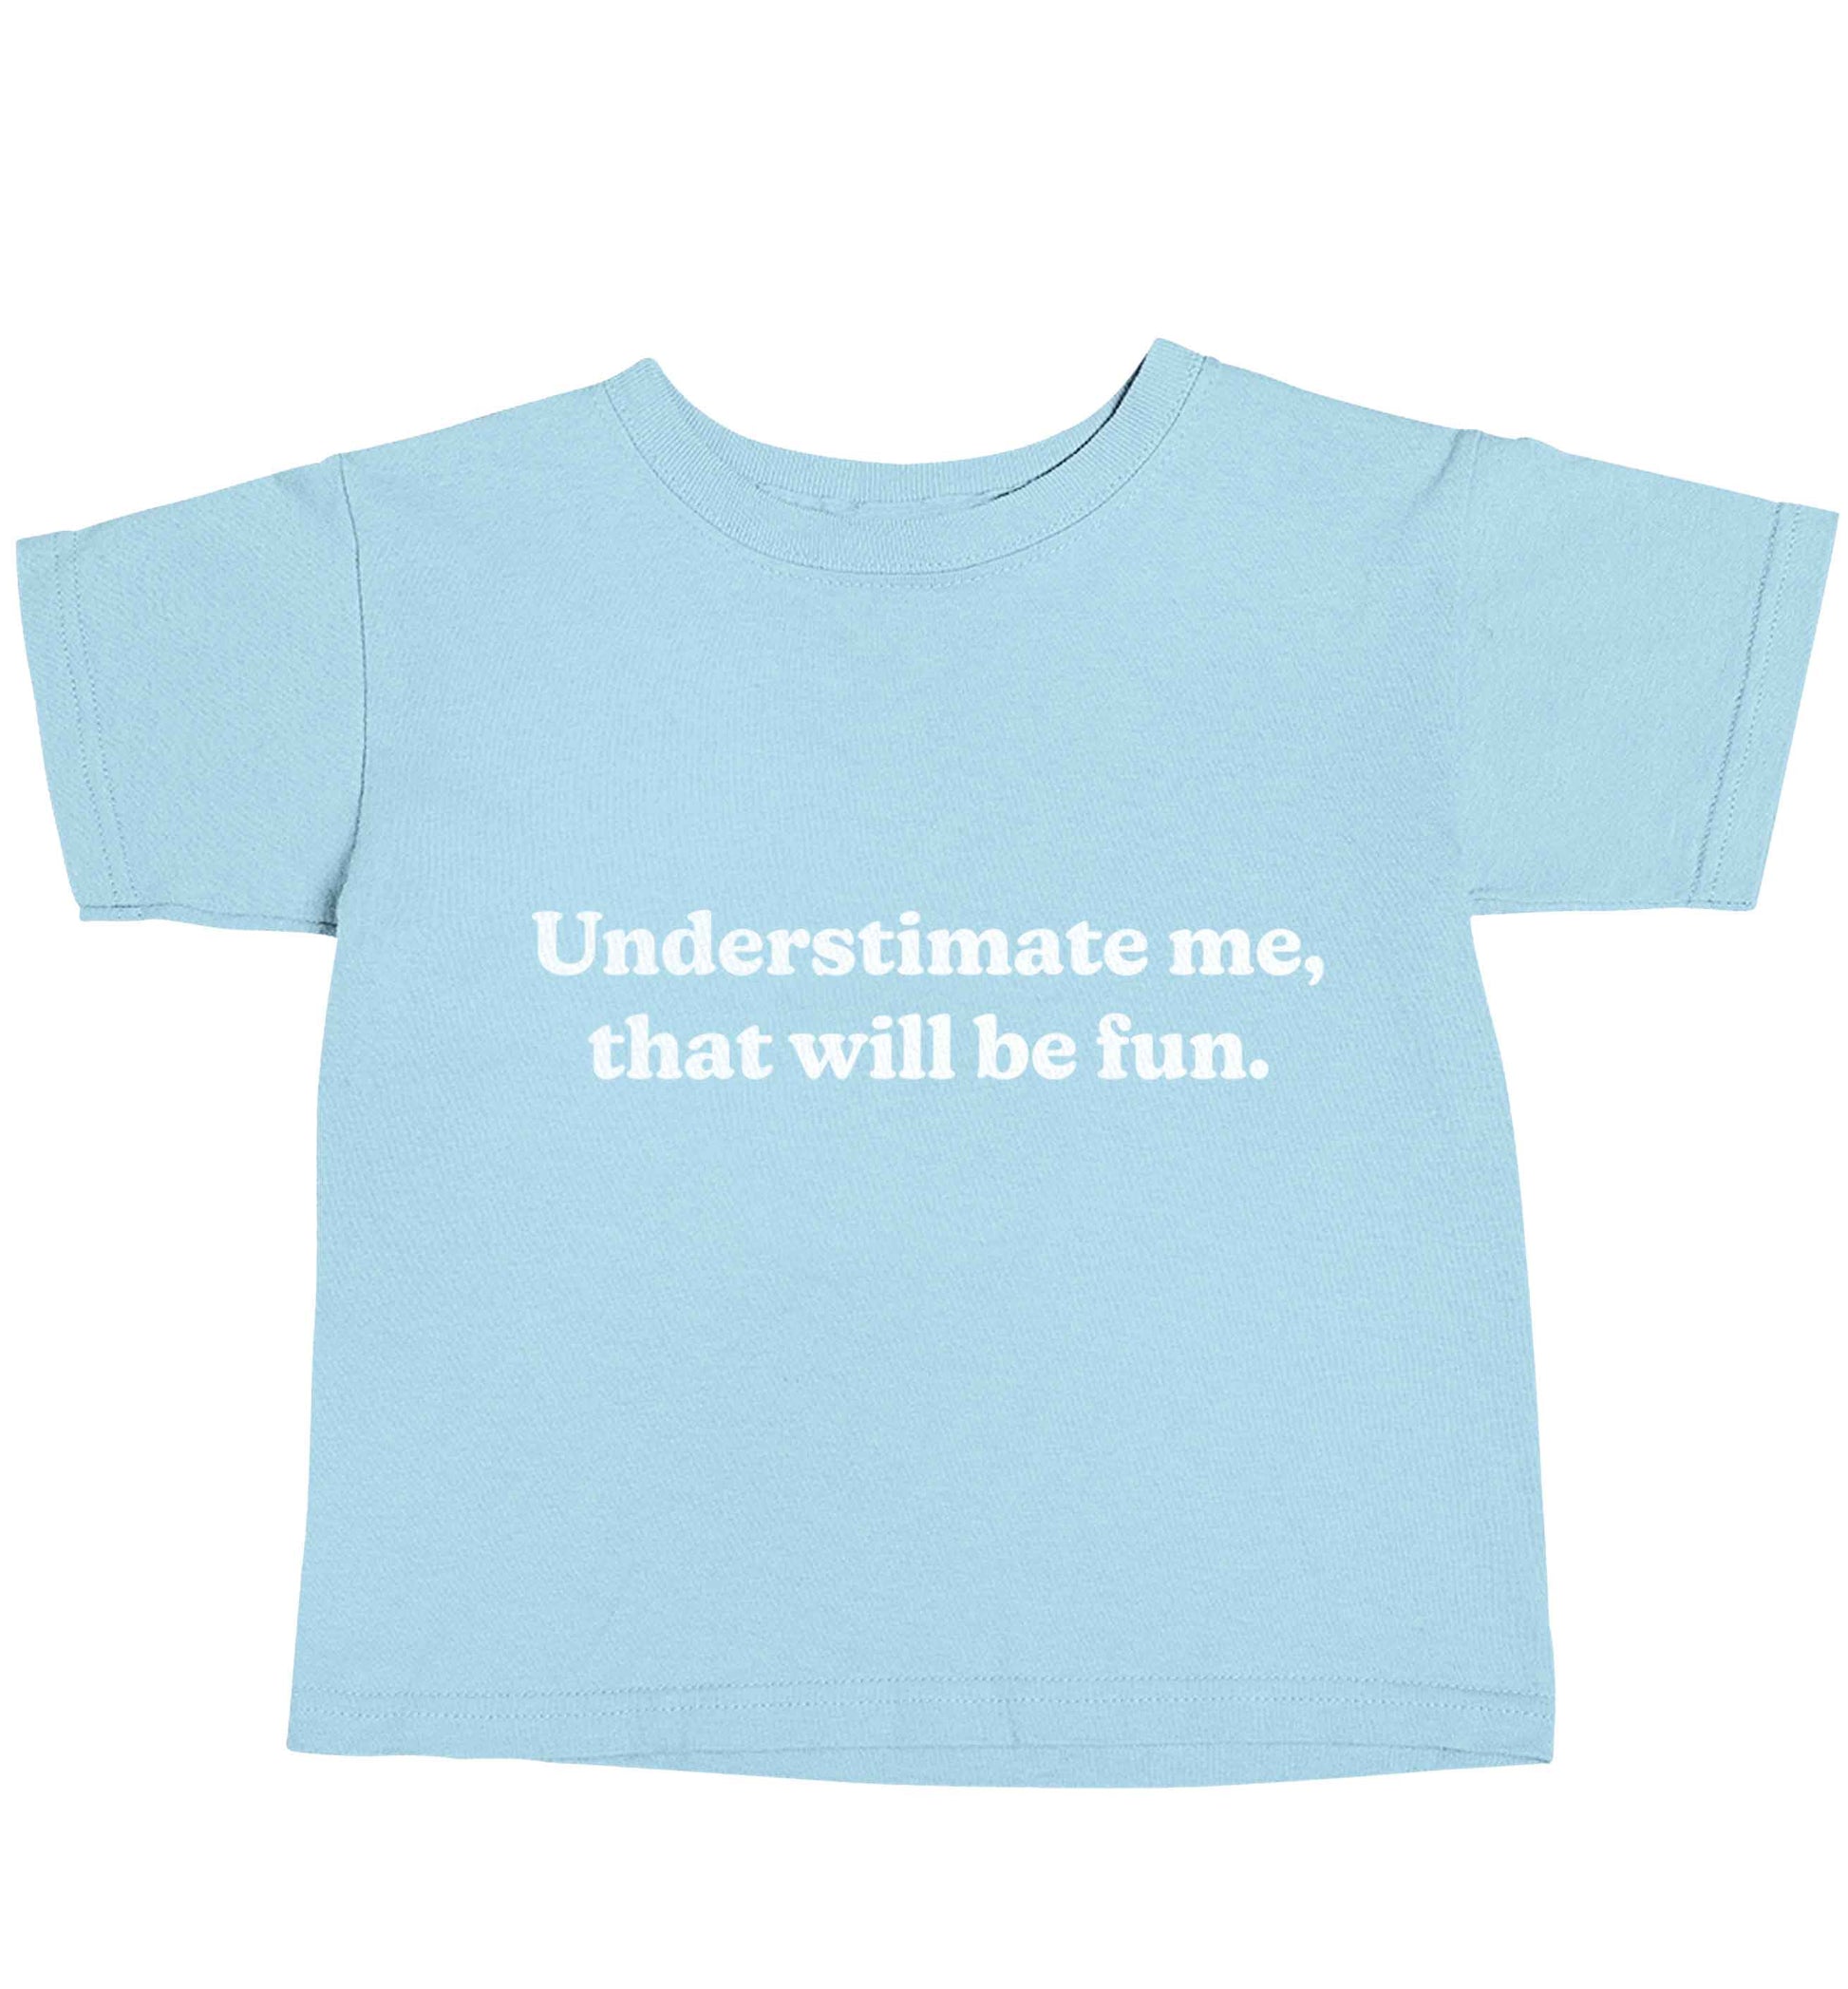 Underestimate me that will be fun light blue baby toddler Tshirt 2 Years